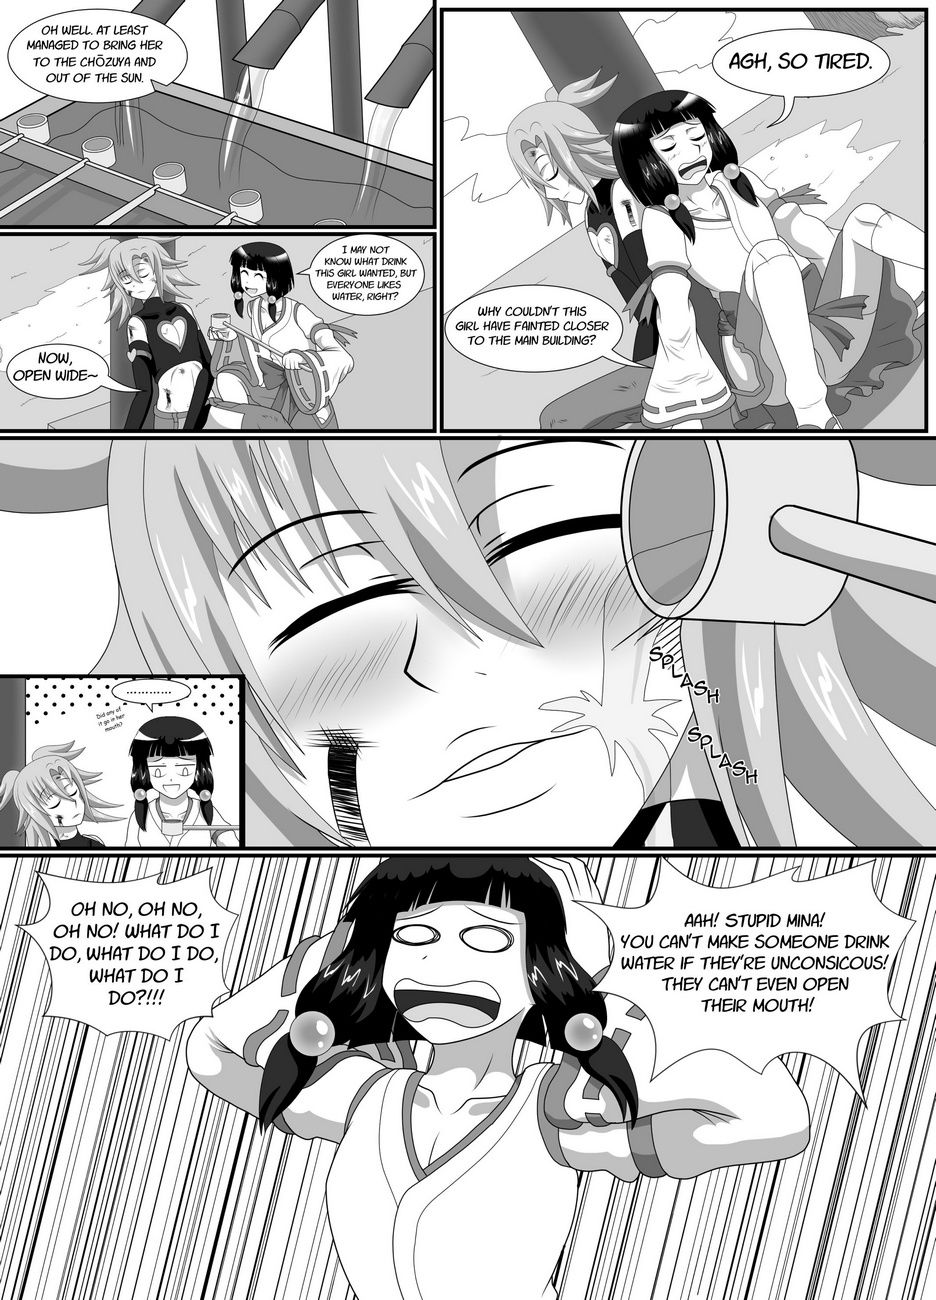 Miko x राक्षस 1 page 1